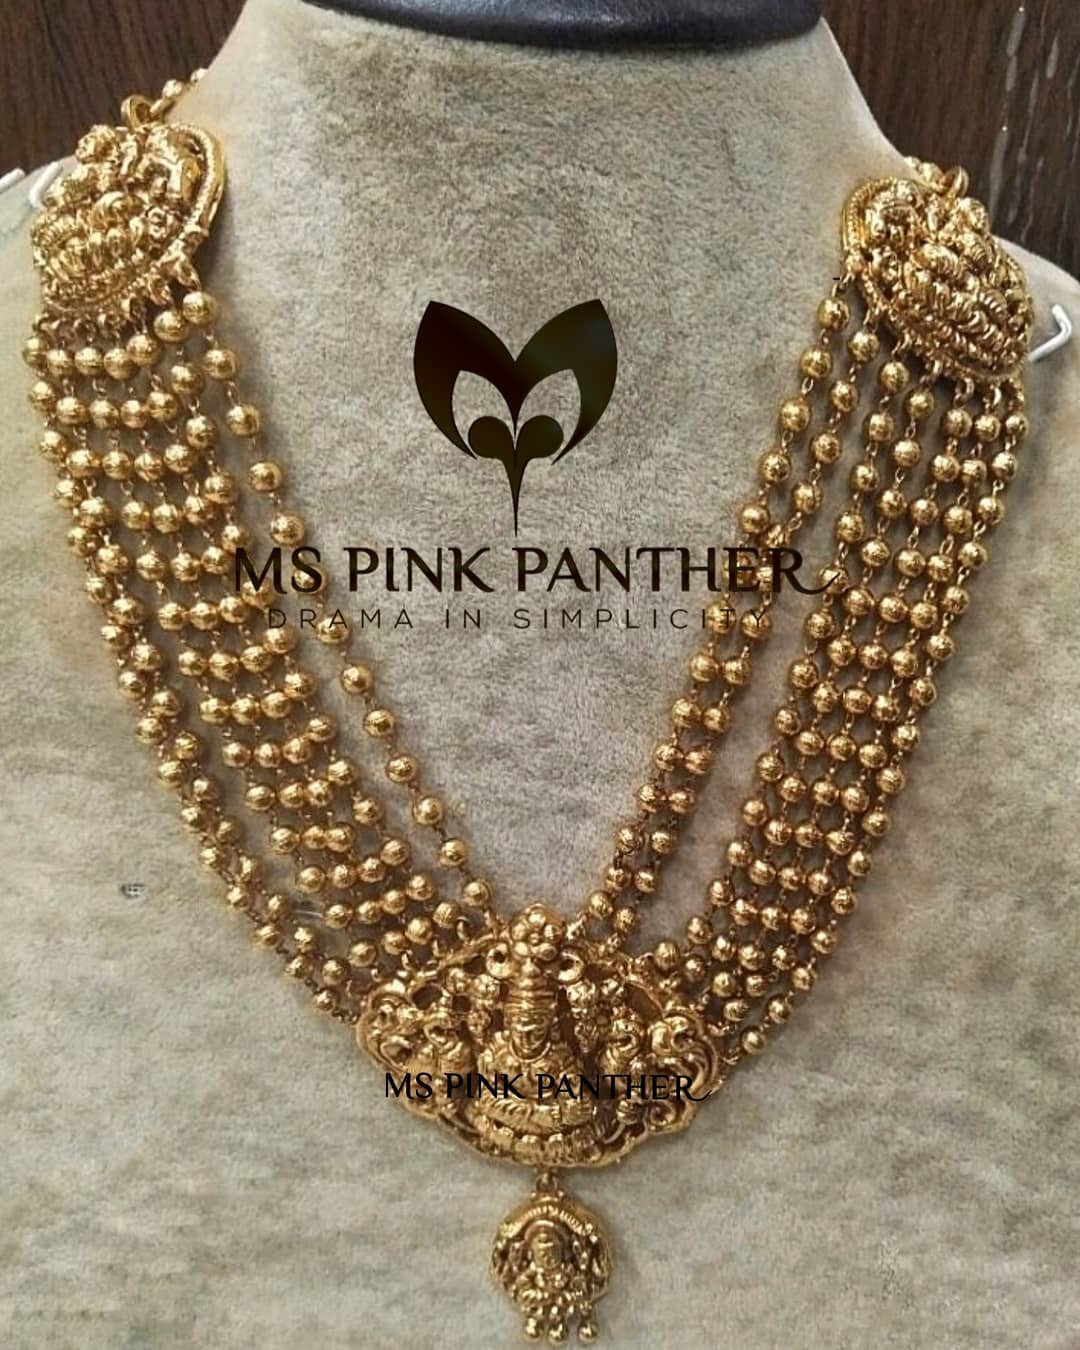 Lovely Long Necklace From Ms Pink Panthers